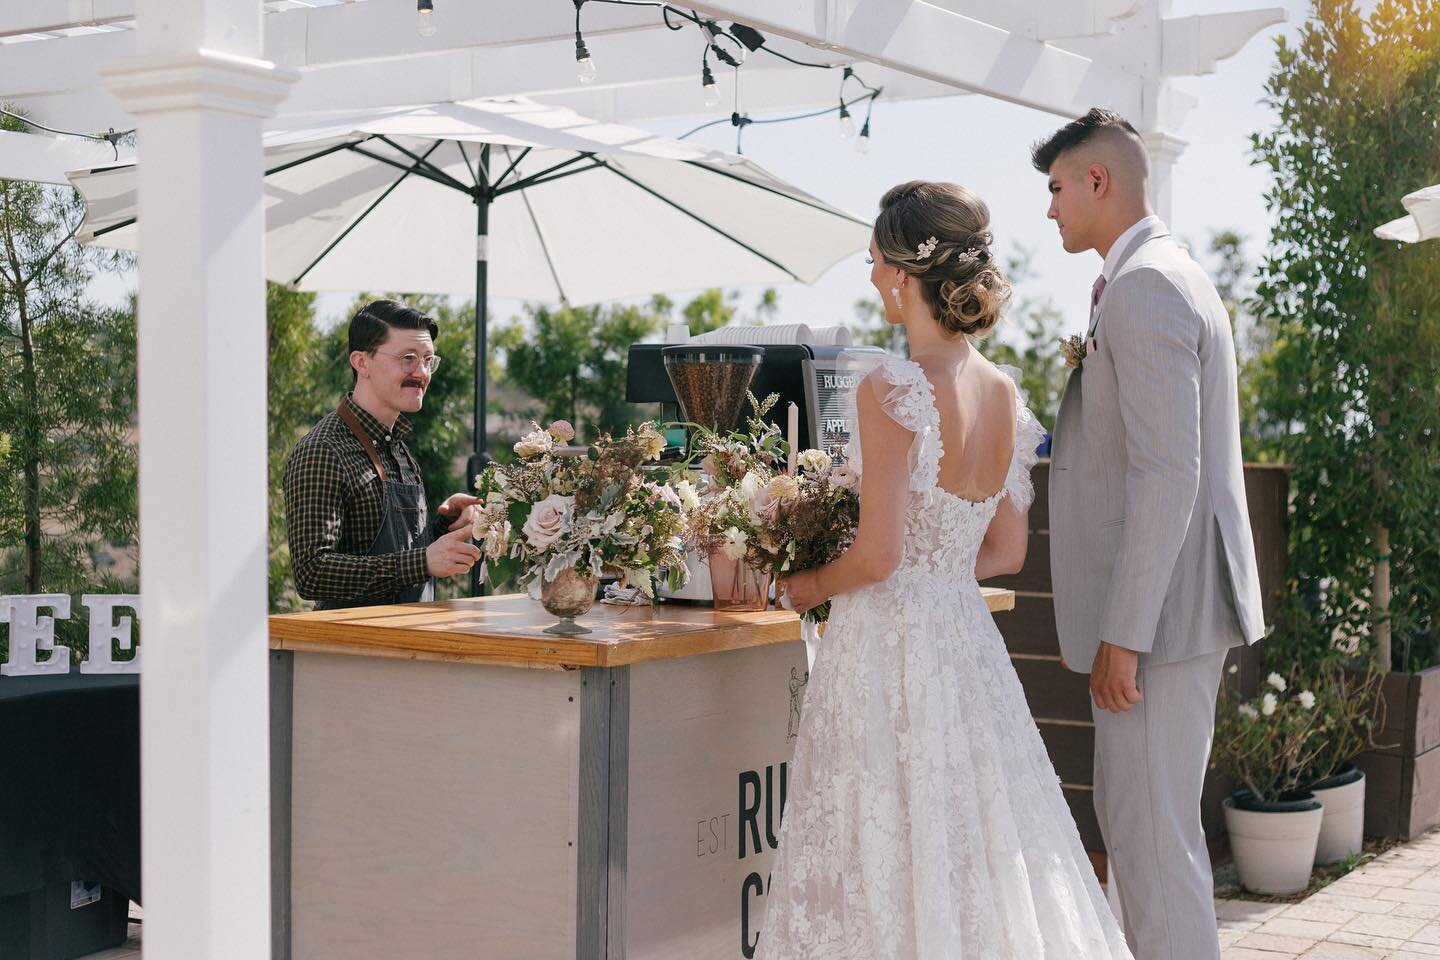 Love these photos from our Las Mariposa Estate photoshoot! Thank you @jasminemariephoto for taking such amazing pictures of us!
&middot;
Venue: @LMEstate
Event Planner: @HLLovely
Videographer: @AnchoredFilms
Photography: @JasmineMariePhoto
Flowers: @